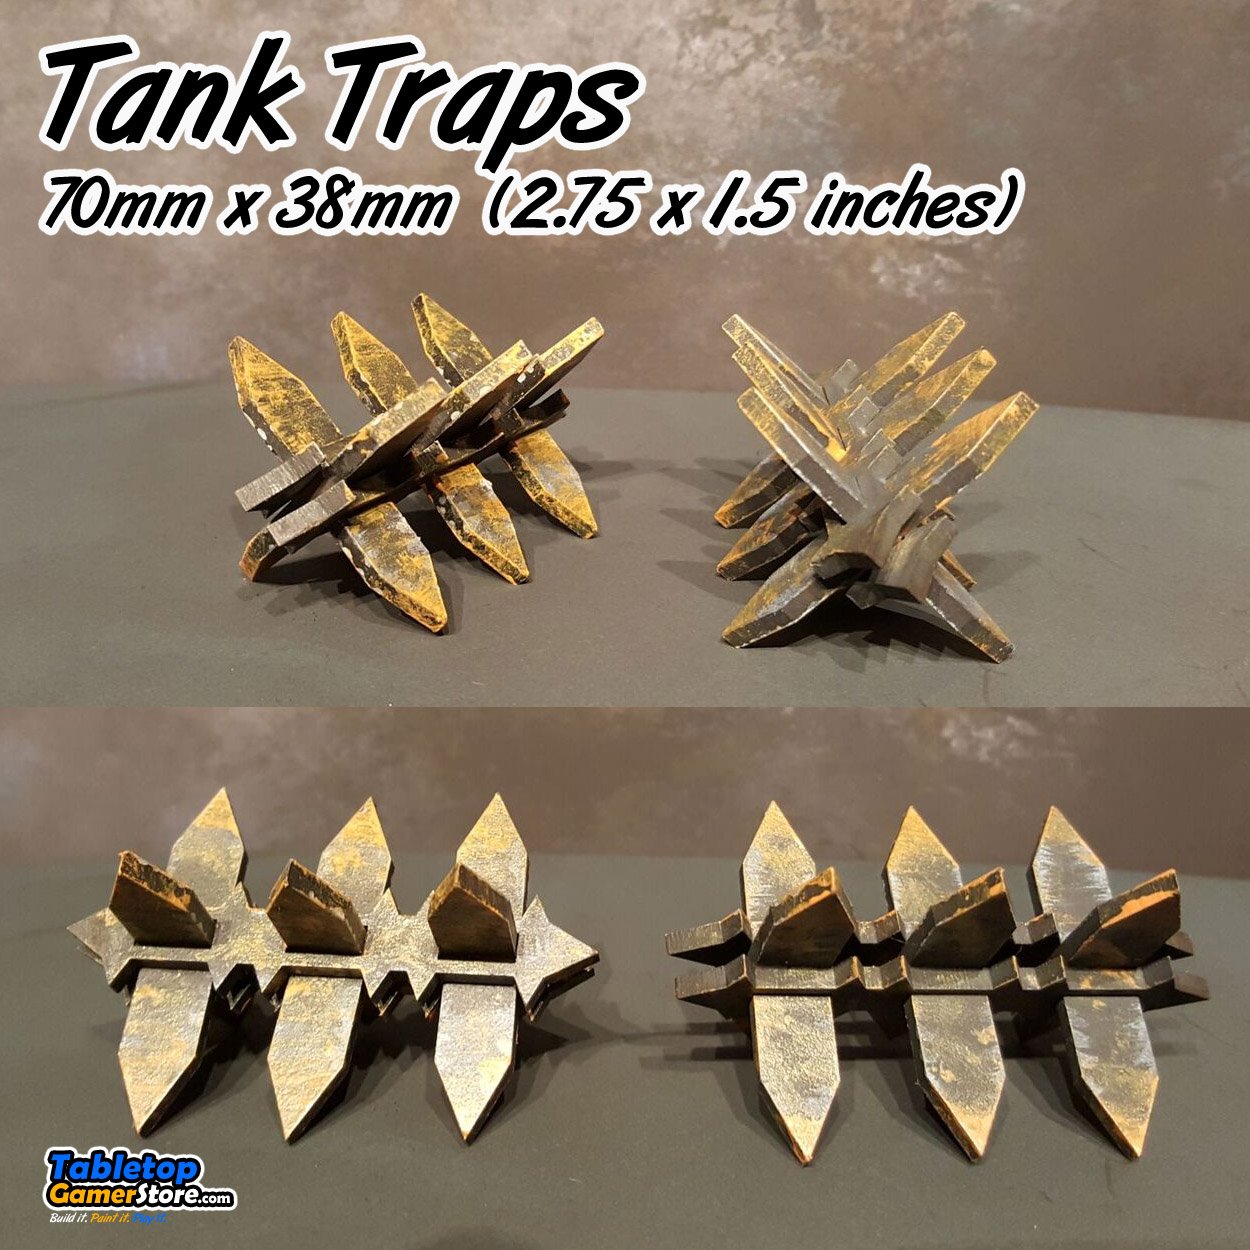 Tank Traps – New Line Now Available!